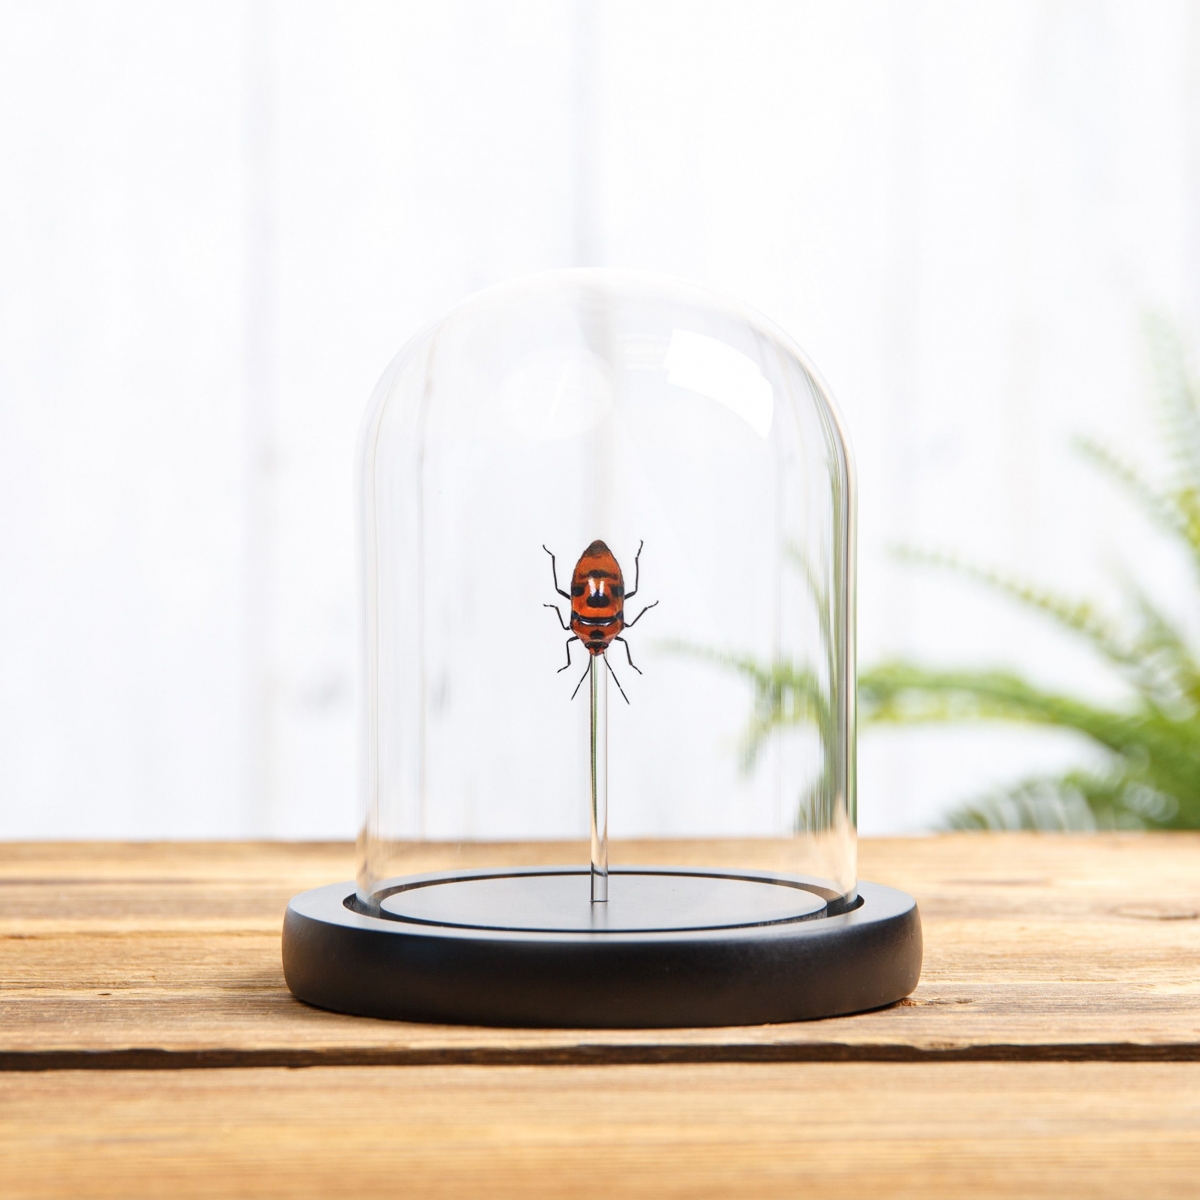 Minibeast Clown Face Bug in Glass Dome with Wooden Base (Eucorysses javanus)